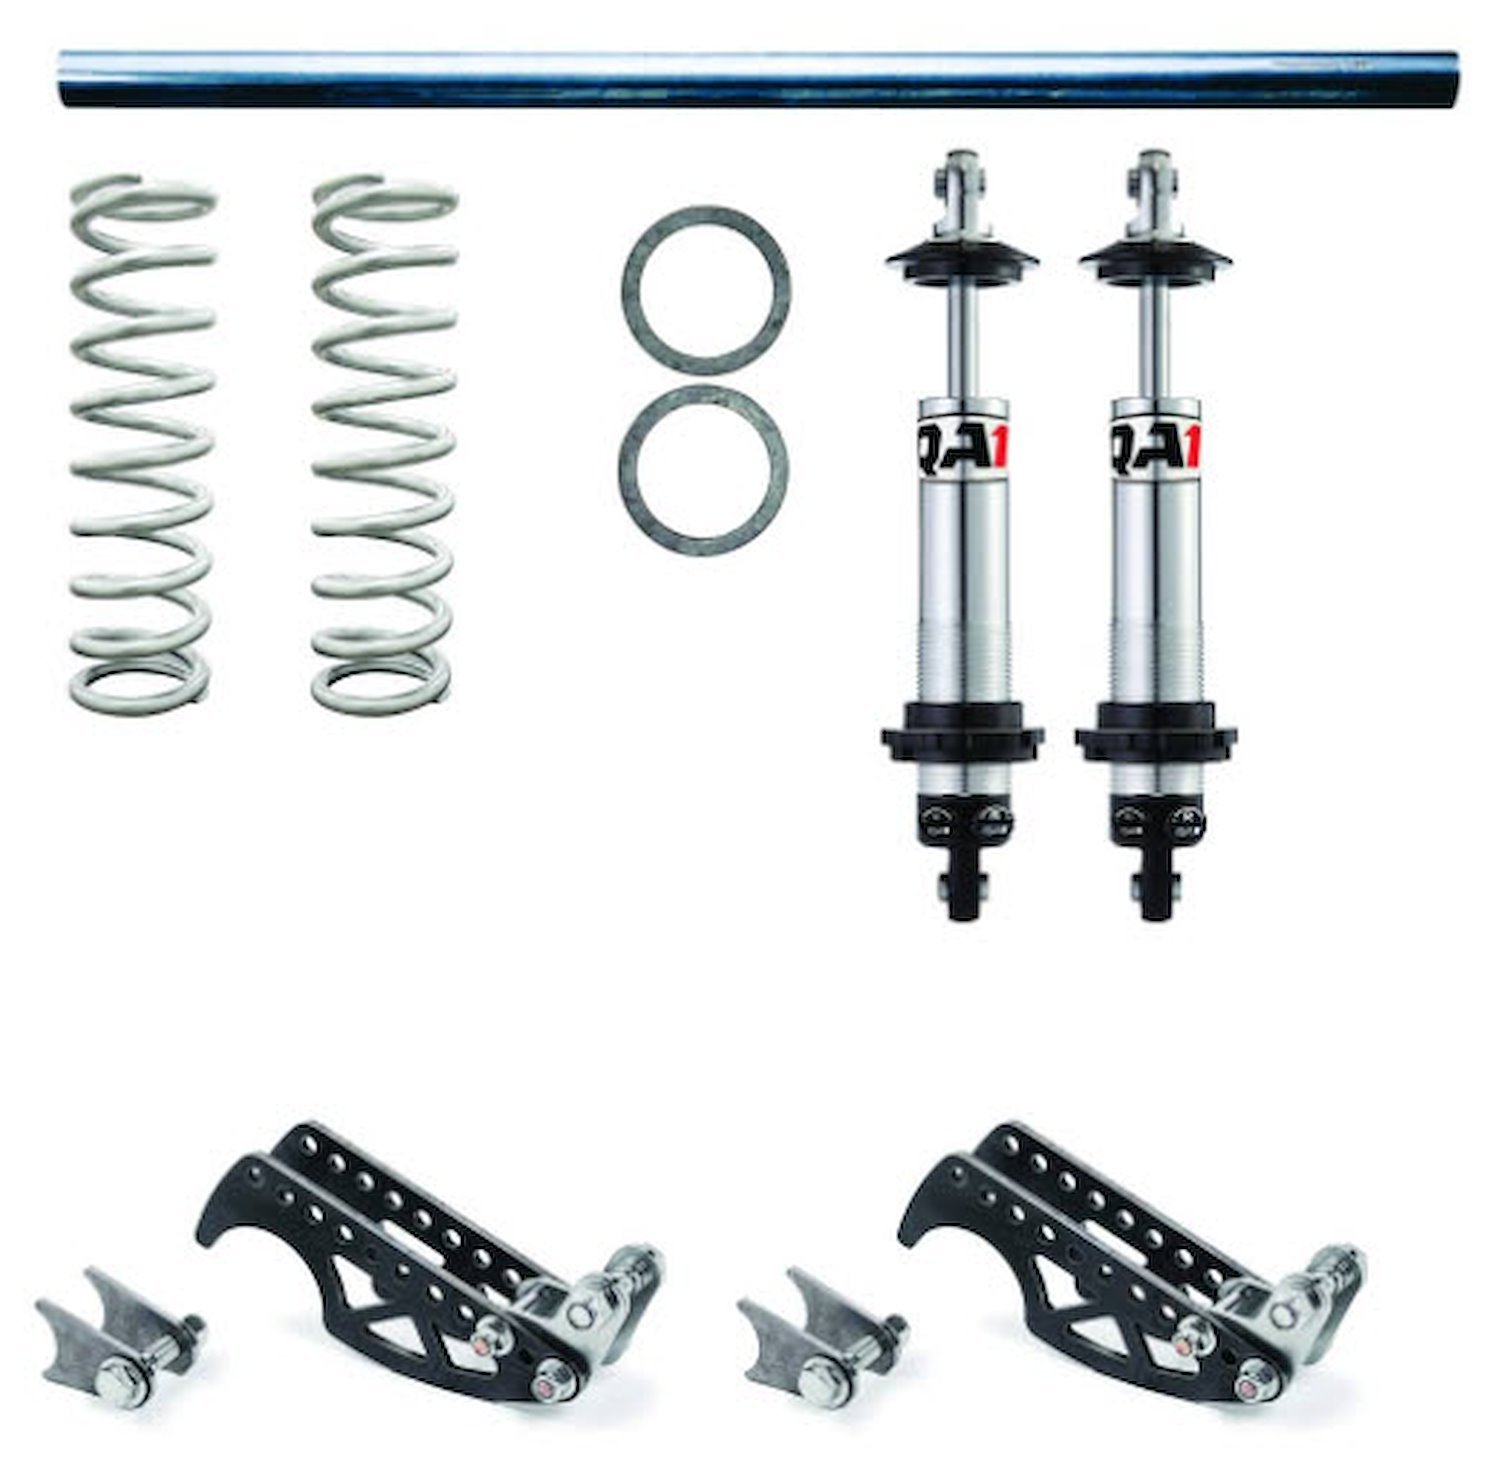 DD501-2501 Heavy-Duty Pro Rear Coil-Over Conversion System for 3 1/4 in. Axle Tubes w/Double-Adjustable Shocks & 250 lb. Springs